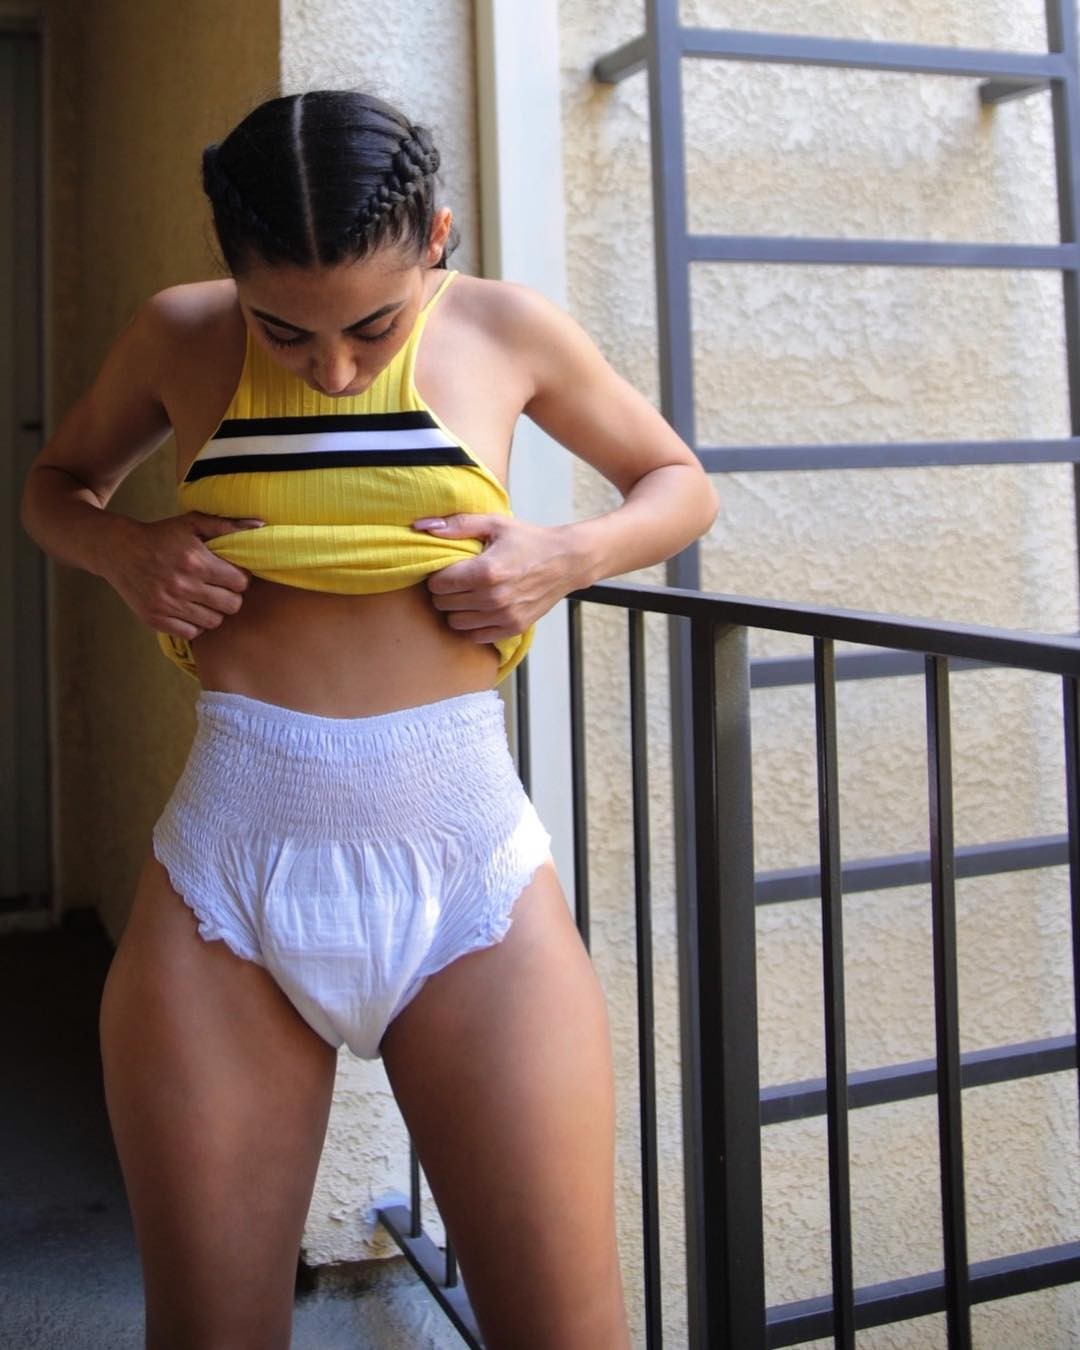 Instagram Model Poses In Diapers For Likes Photos